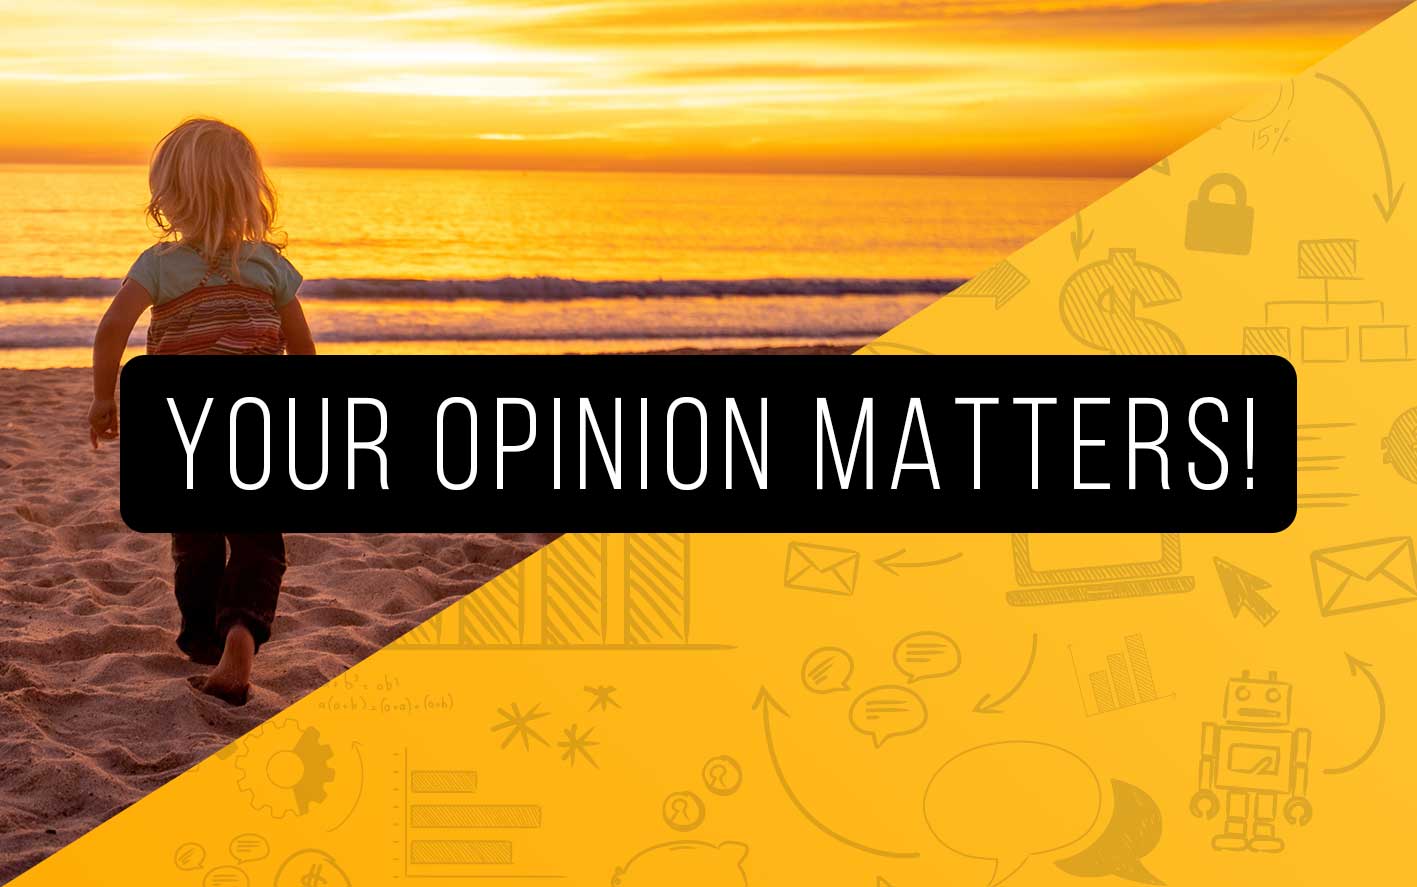 Your opinion matters!